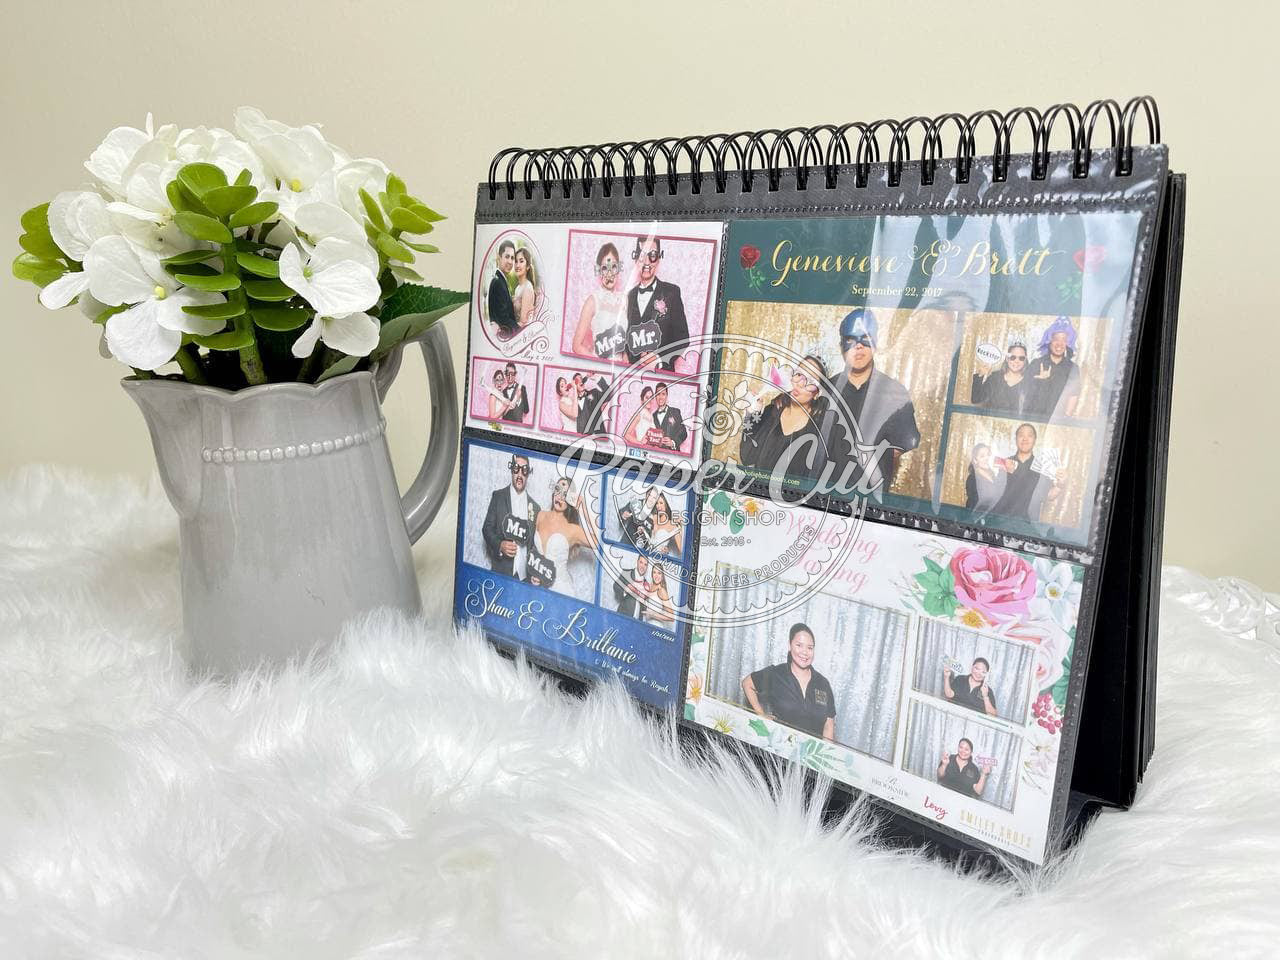 Bulk (Pack of 20 PCS) Photo Table-top Display Spiral Ring Bind Album for 4x6 inches Photos Black